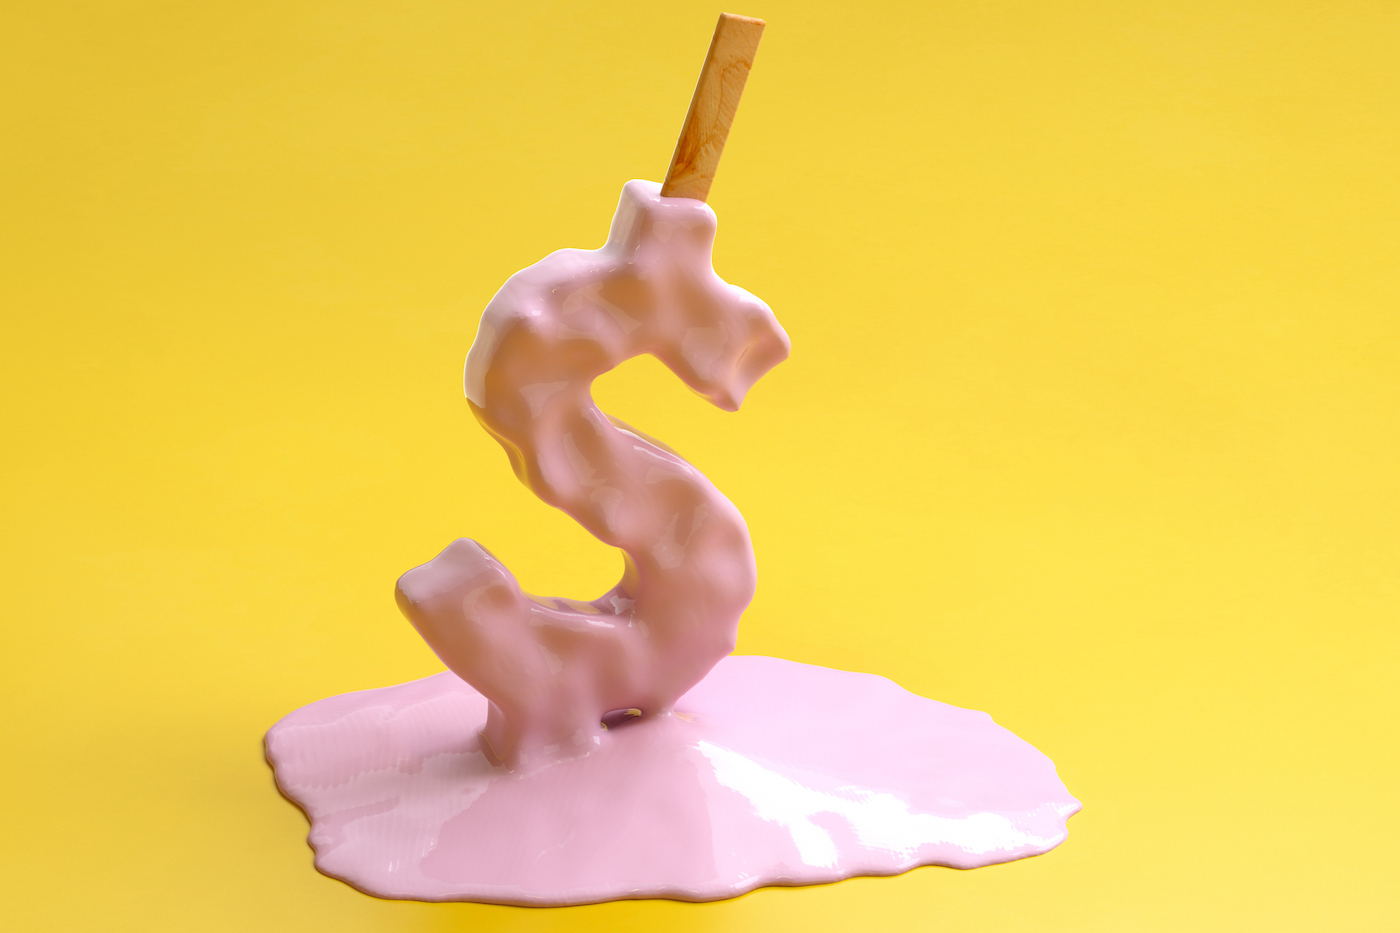 Digitally generated image of a pink candy in the shape of a DOLLAR sign melting on a yellow background.  Inflation concept.